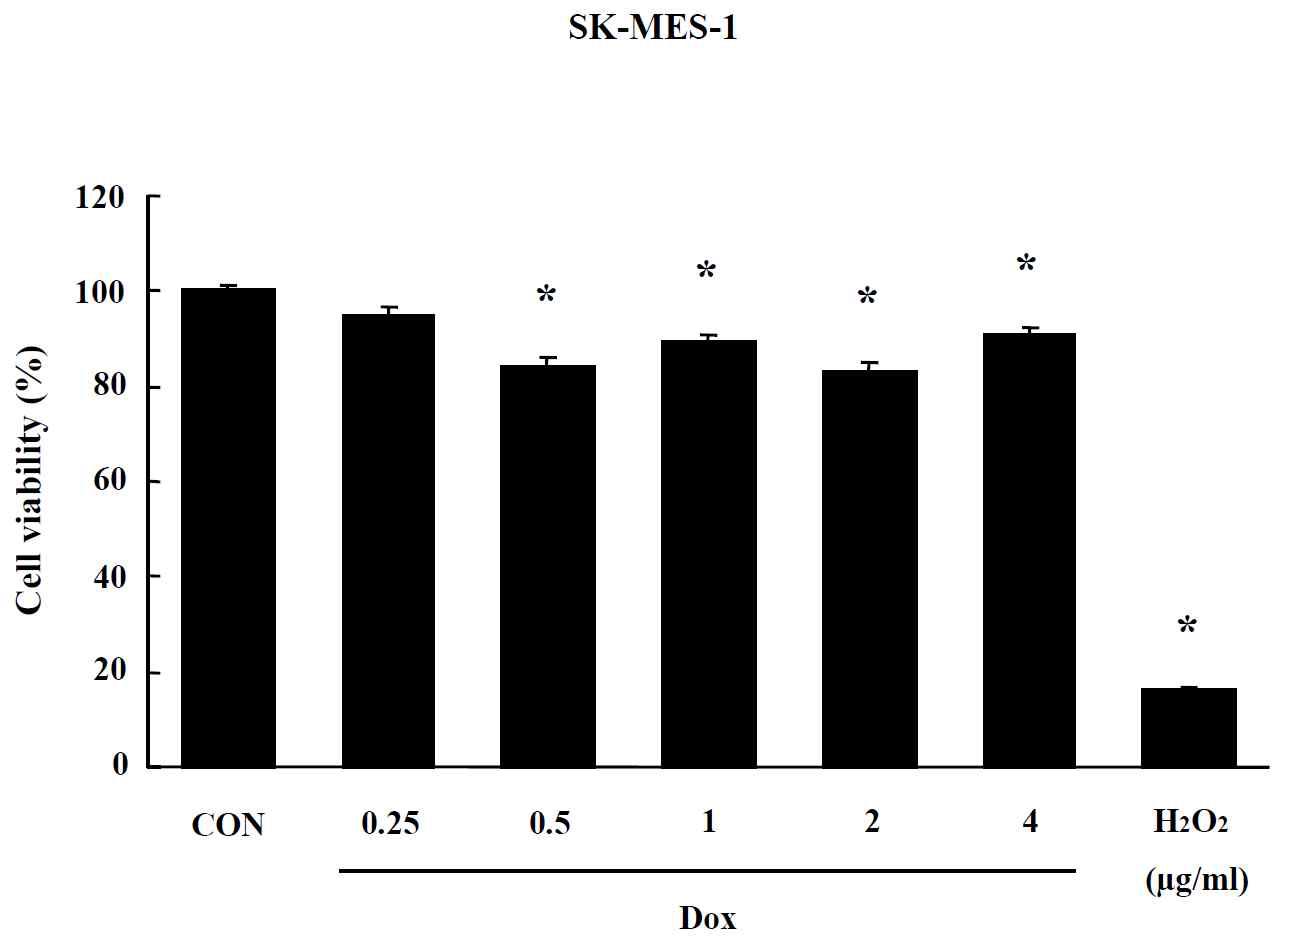 Effects of Doxil on MTT assay in SK-MES-1 cells. Cells were treated with drug for 24 hr. Data are shown as means ± SE (n = 5). * p<0.05, significantly different from the control